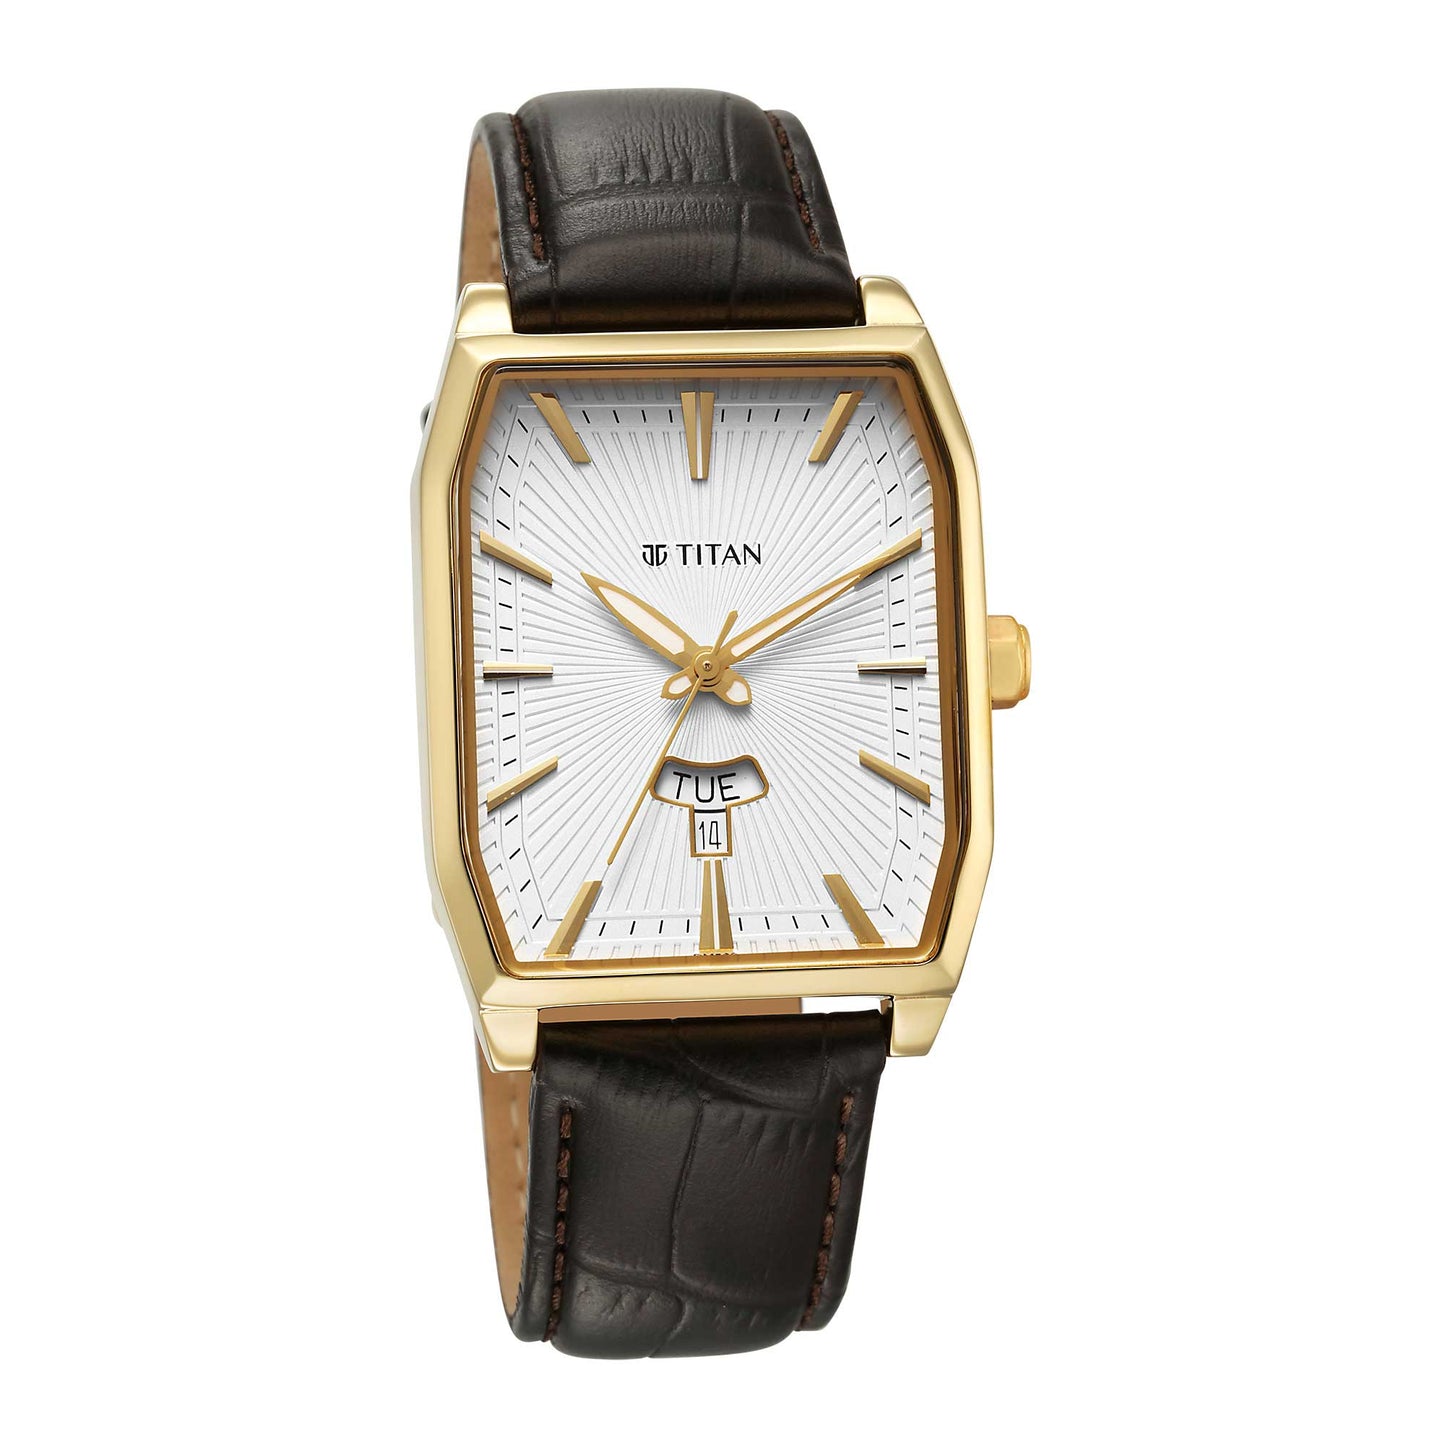 Titan Regalia Opulent White Dial Analog with Day and Date Leather Strap Watch for Men